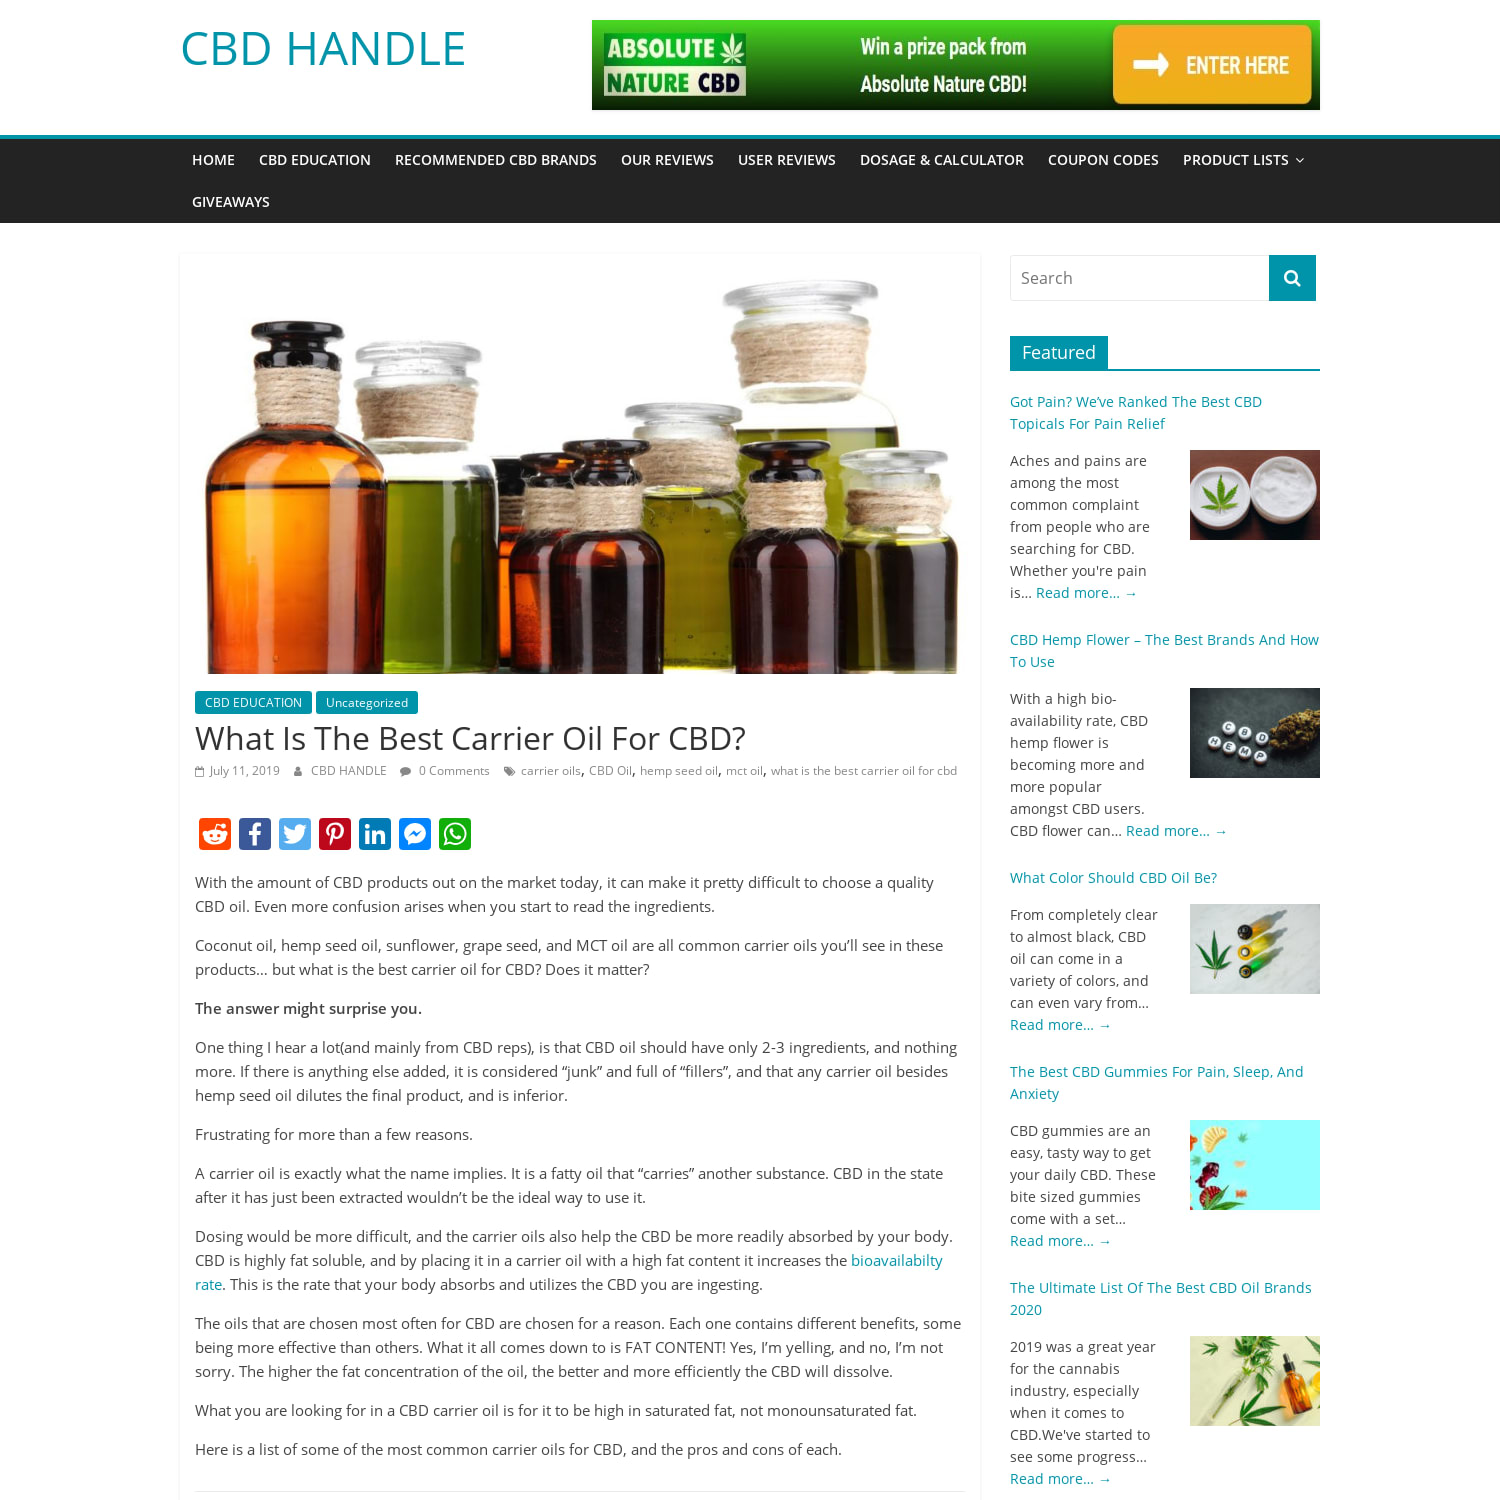 What Is The Best Carrier Oil For CBD?